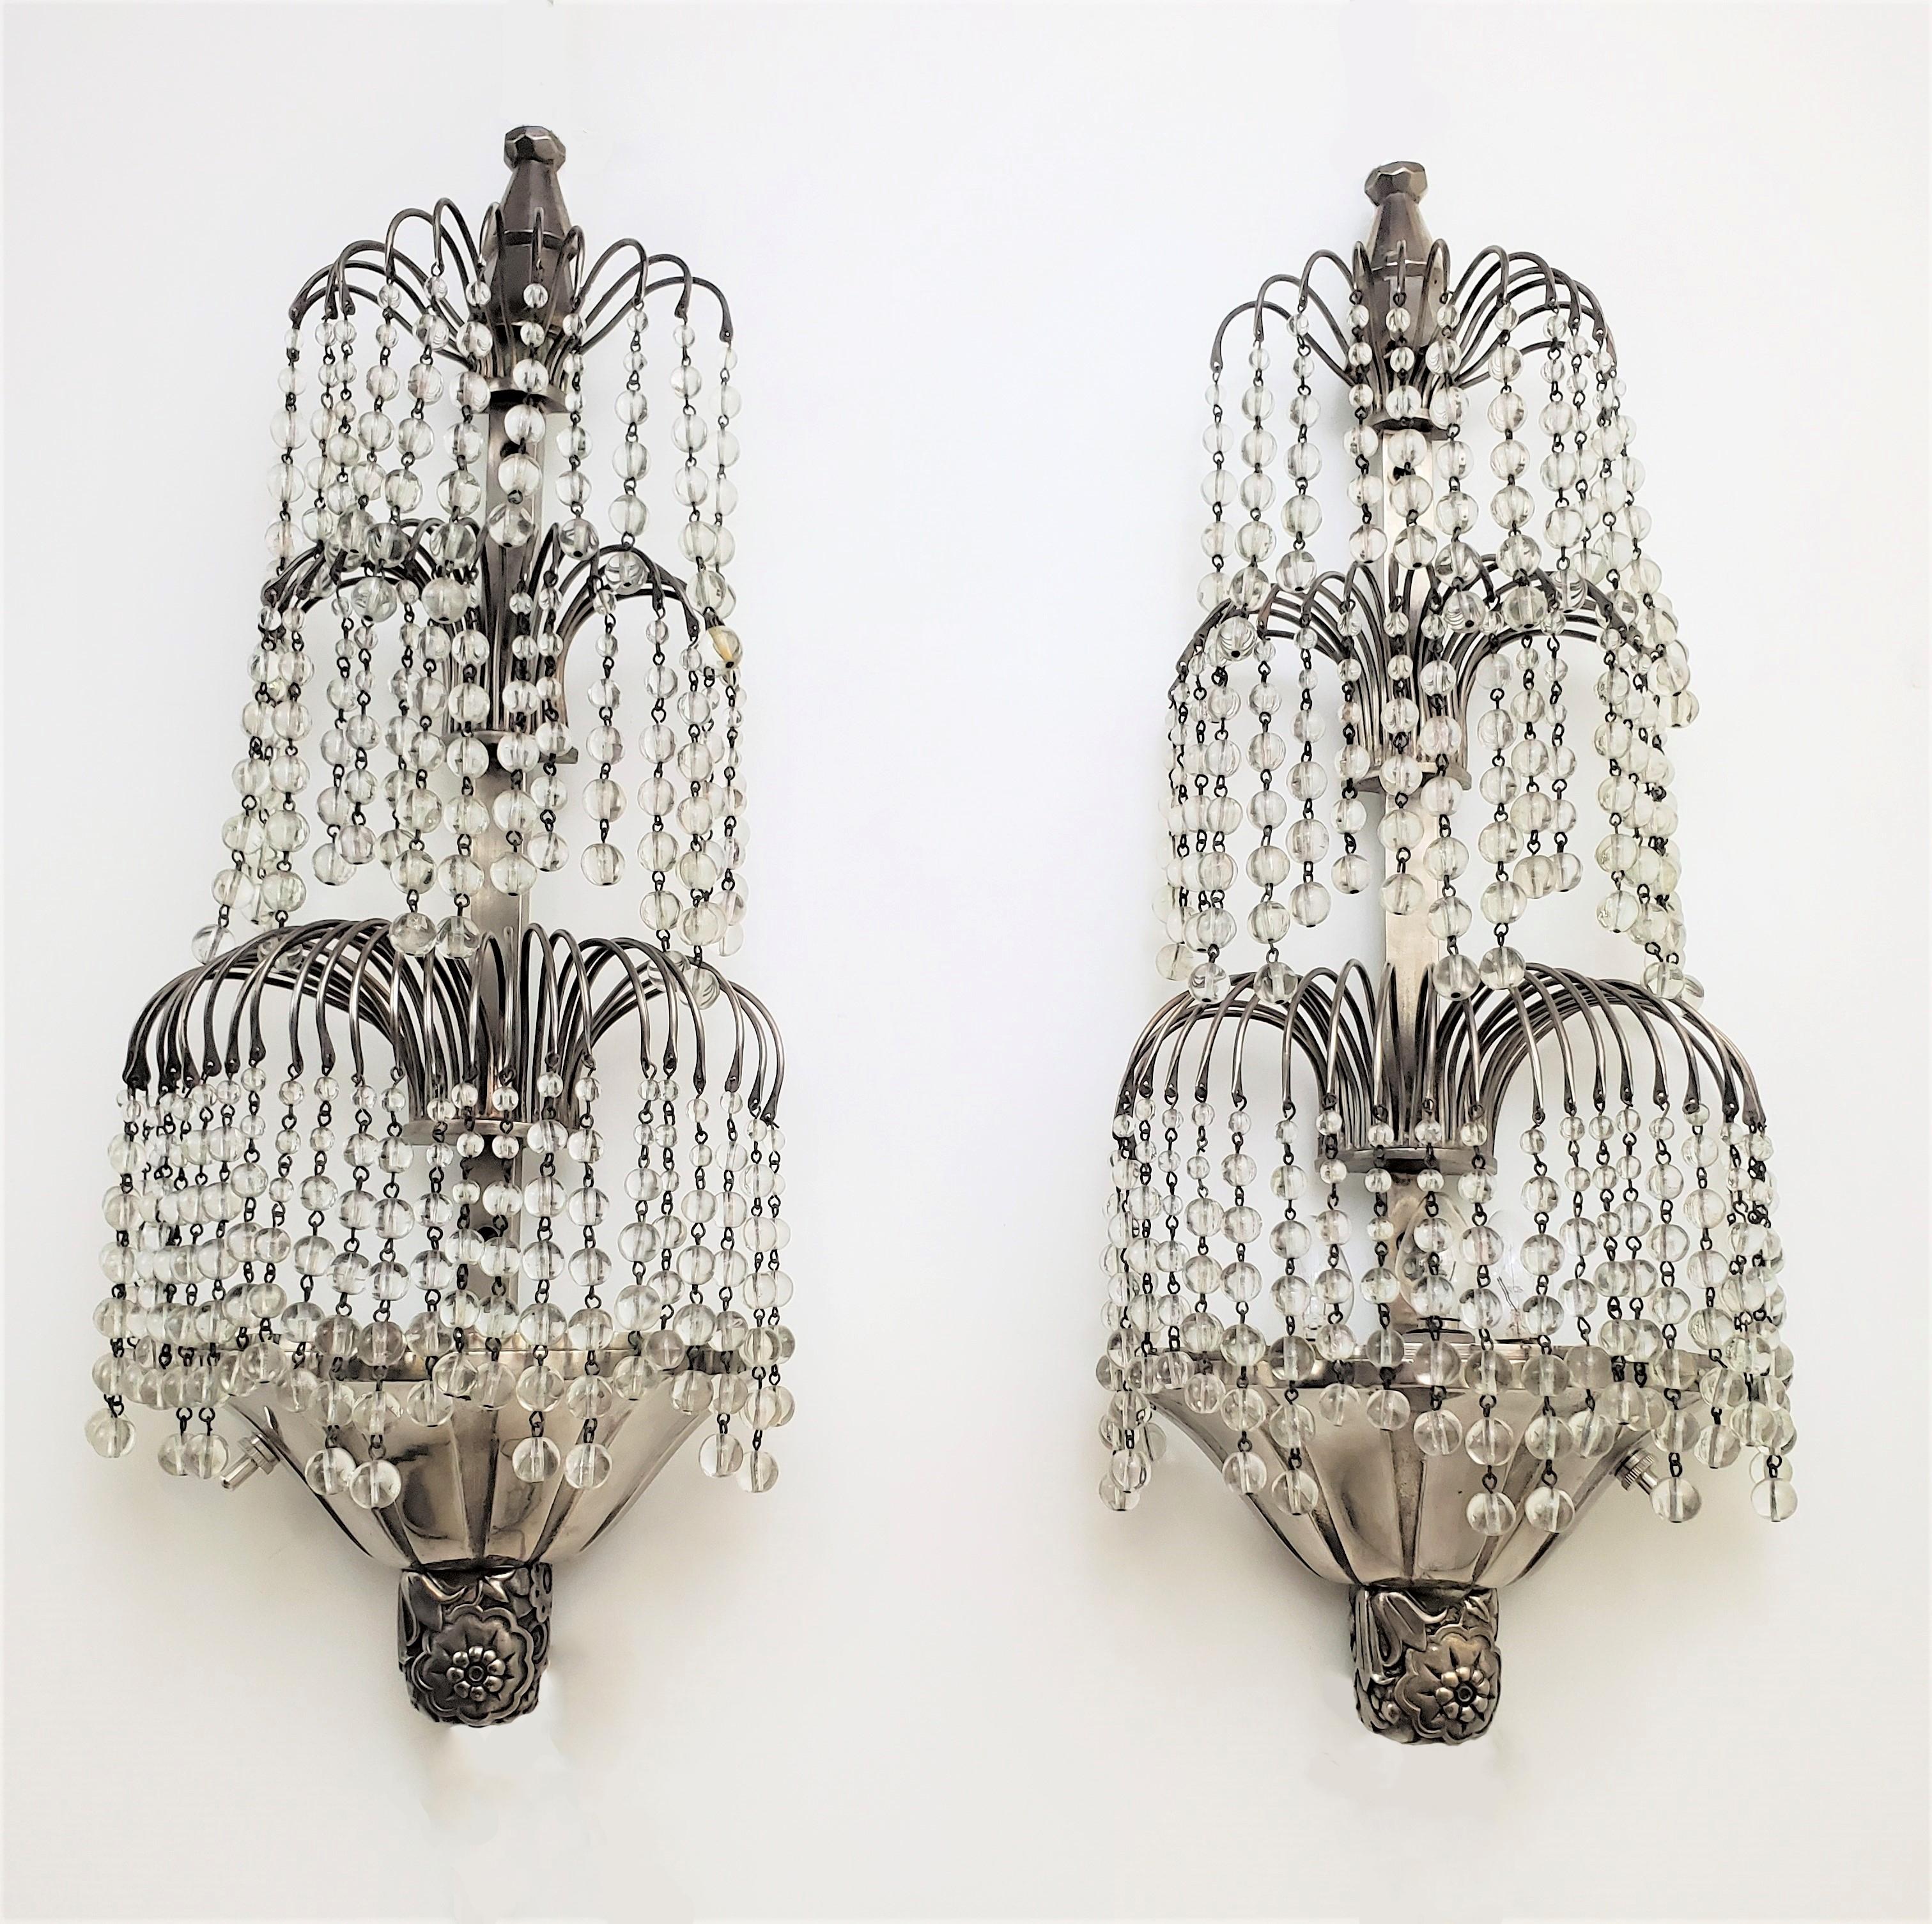 A pair of elegant French Art Deco tiered waterfall sconces attributed to Louis Süe and André Mare. Delicate and dazzling crystal beads of glass cascade down on three levels from a nickeled bronze armature ending with fluted cap and a stylized